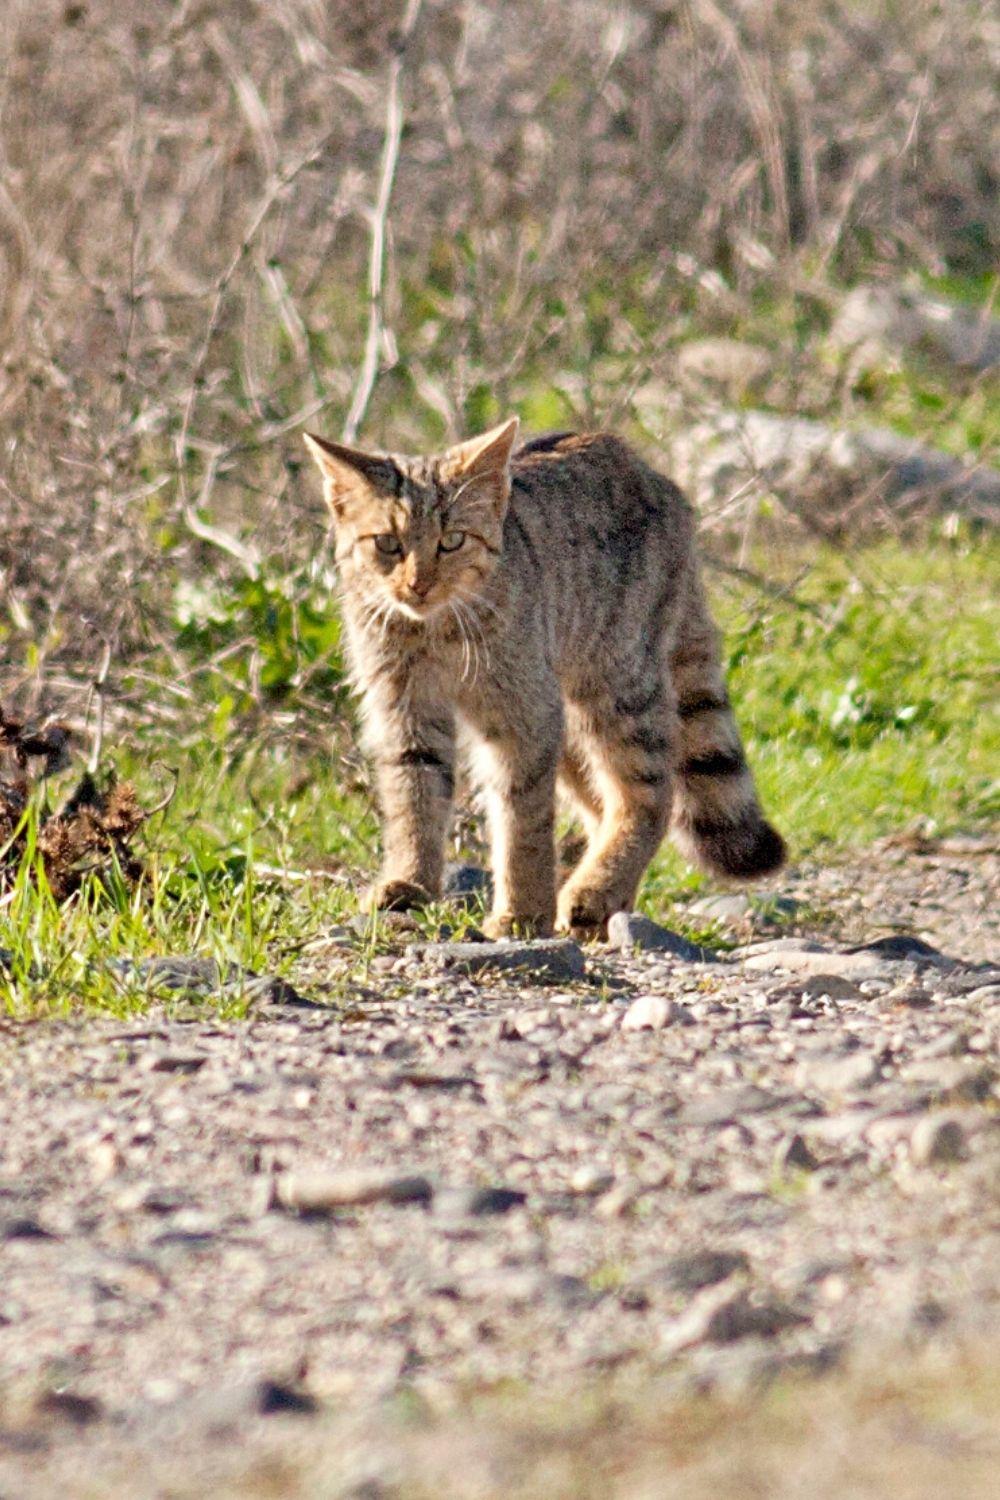 Wild cats either hold their tails downward or horizontally as a survival strategy